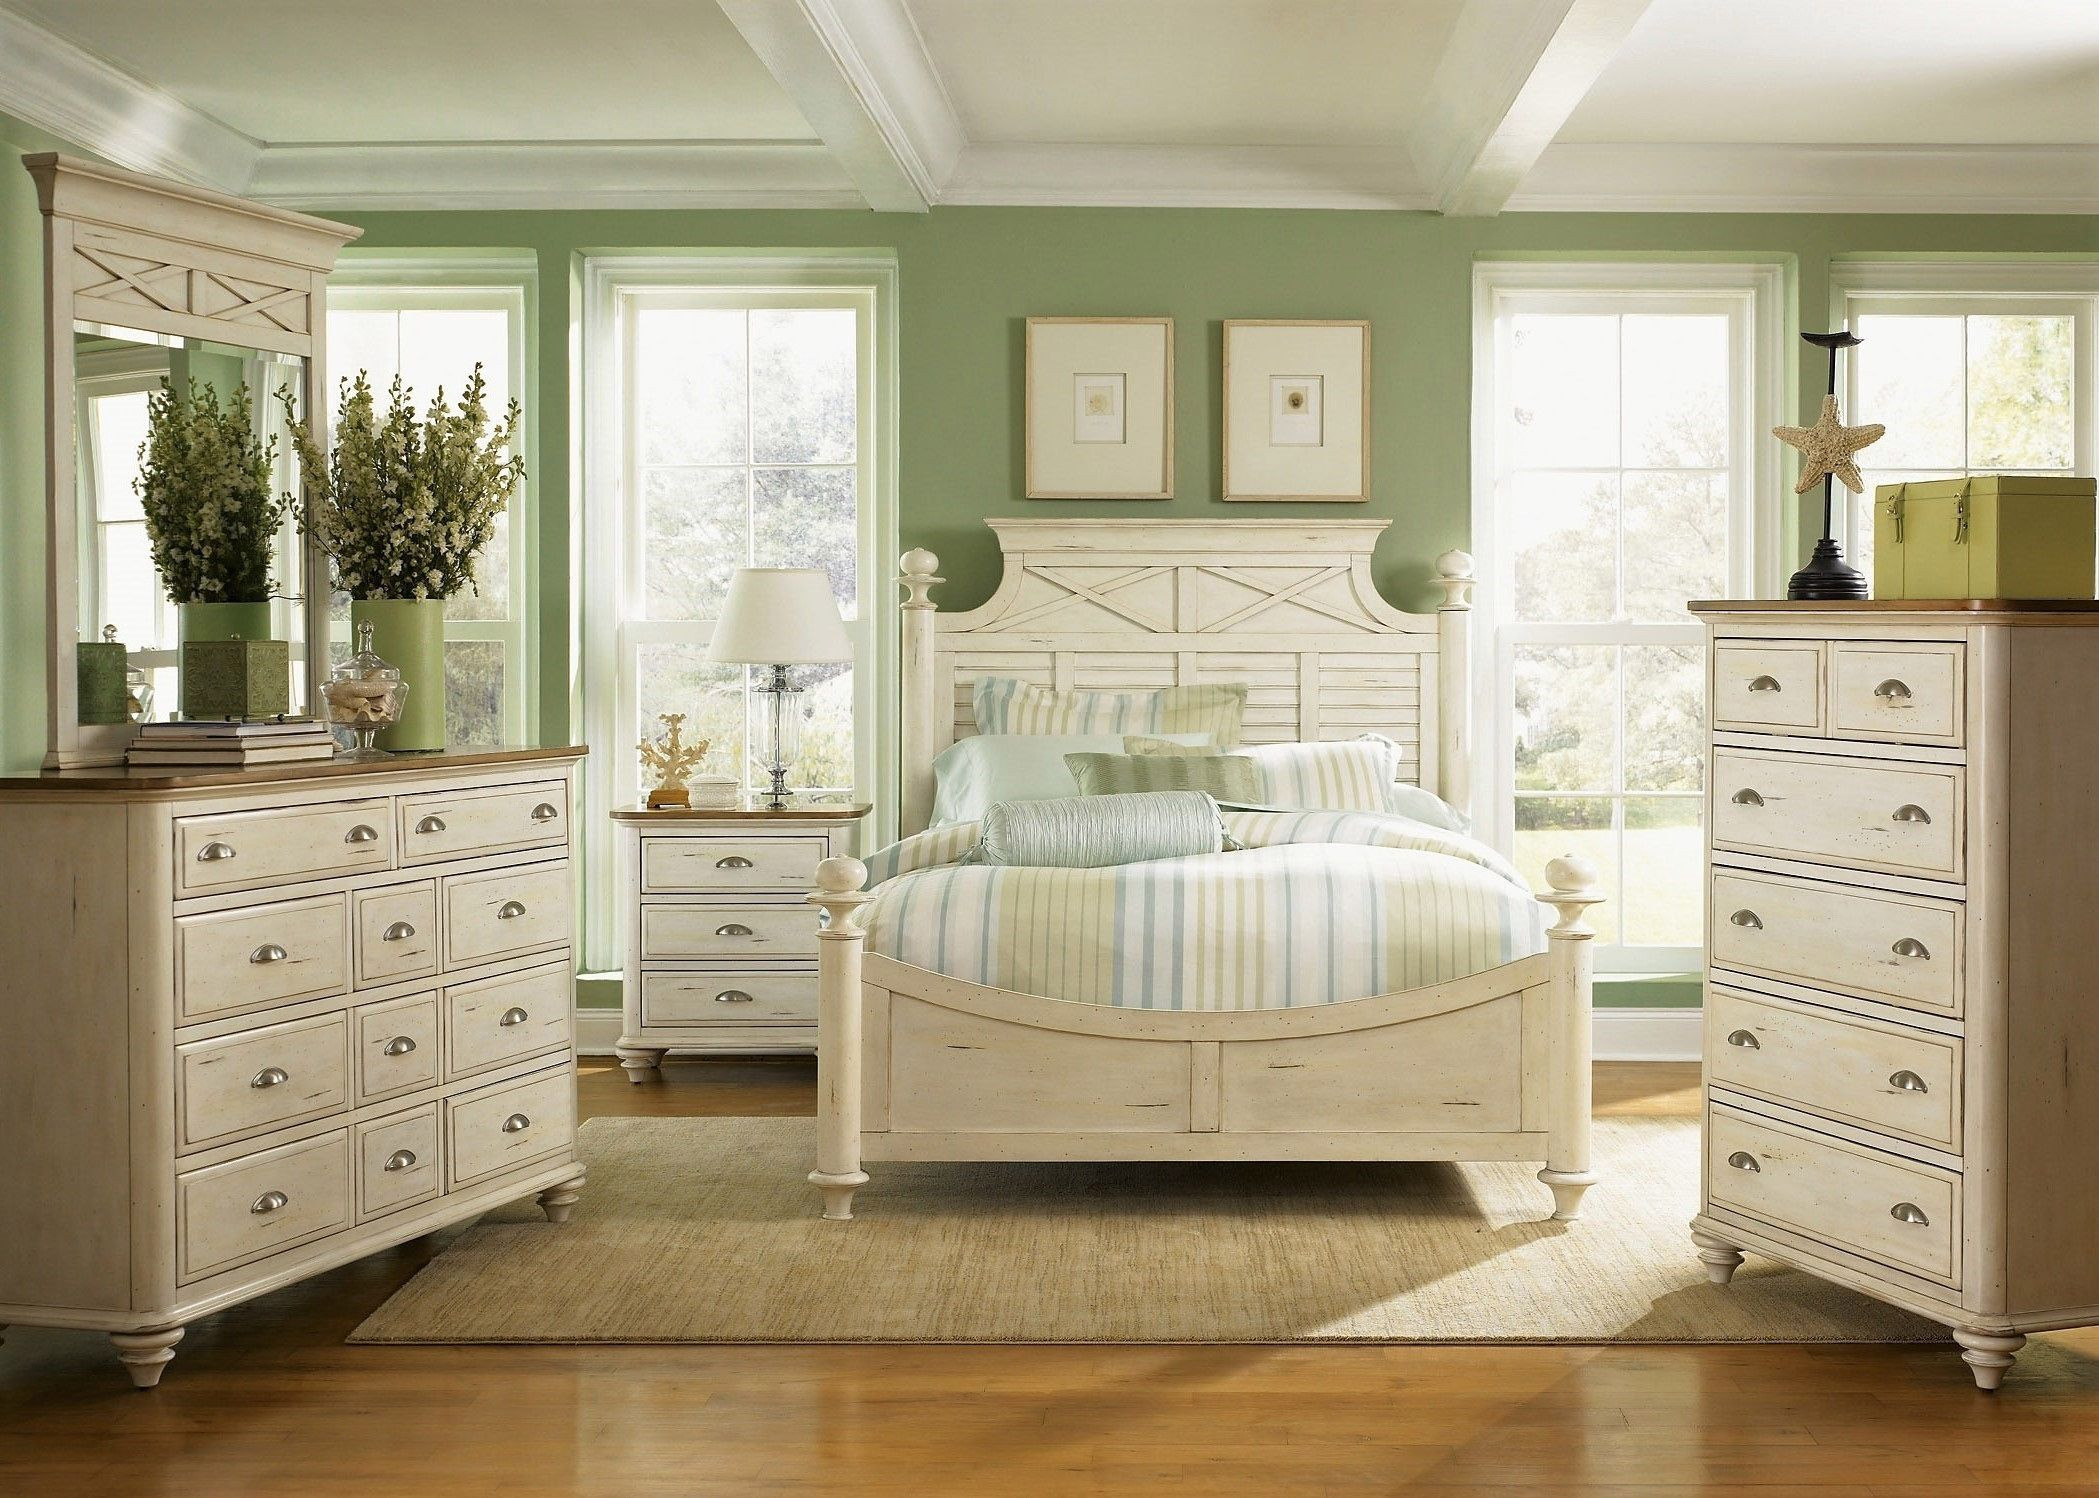 Rustic White Bedroom Furniture
 Summerville Poster Bedroom Collection